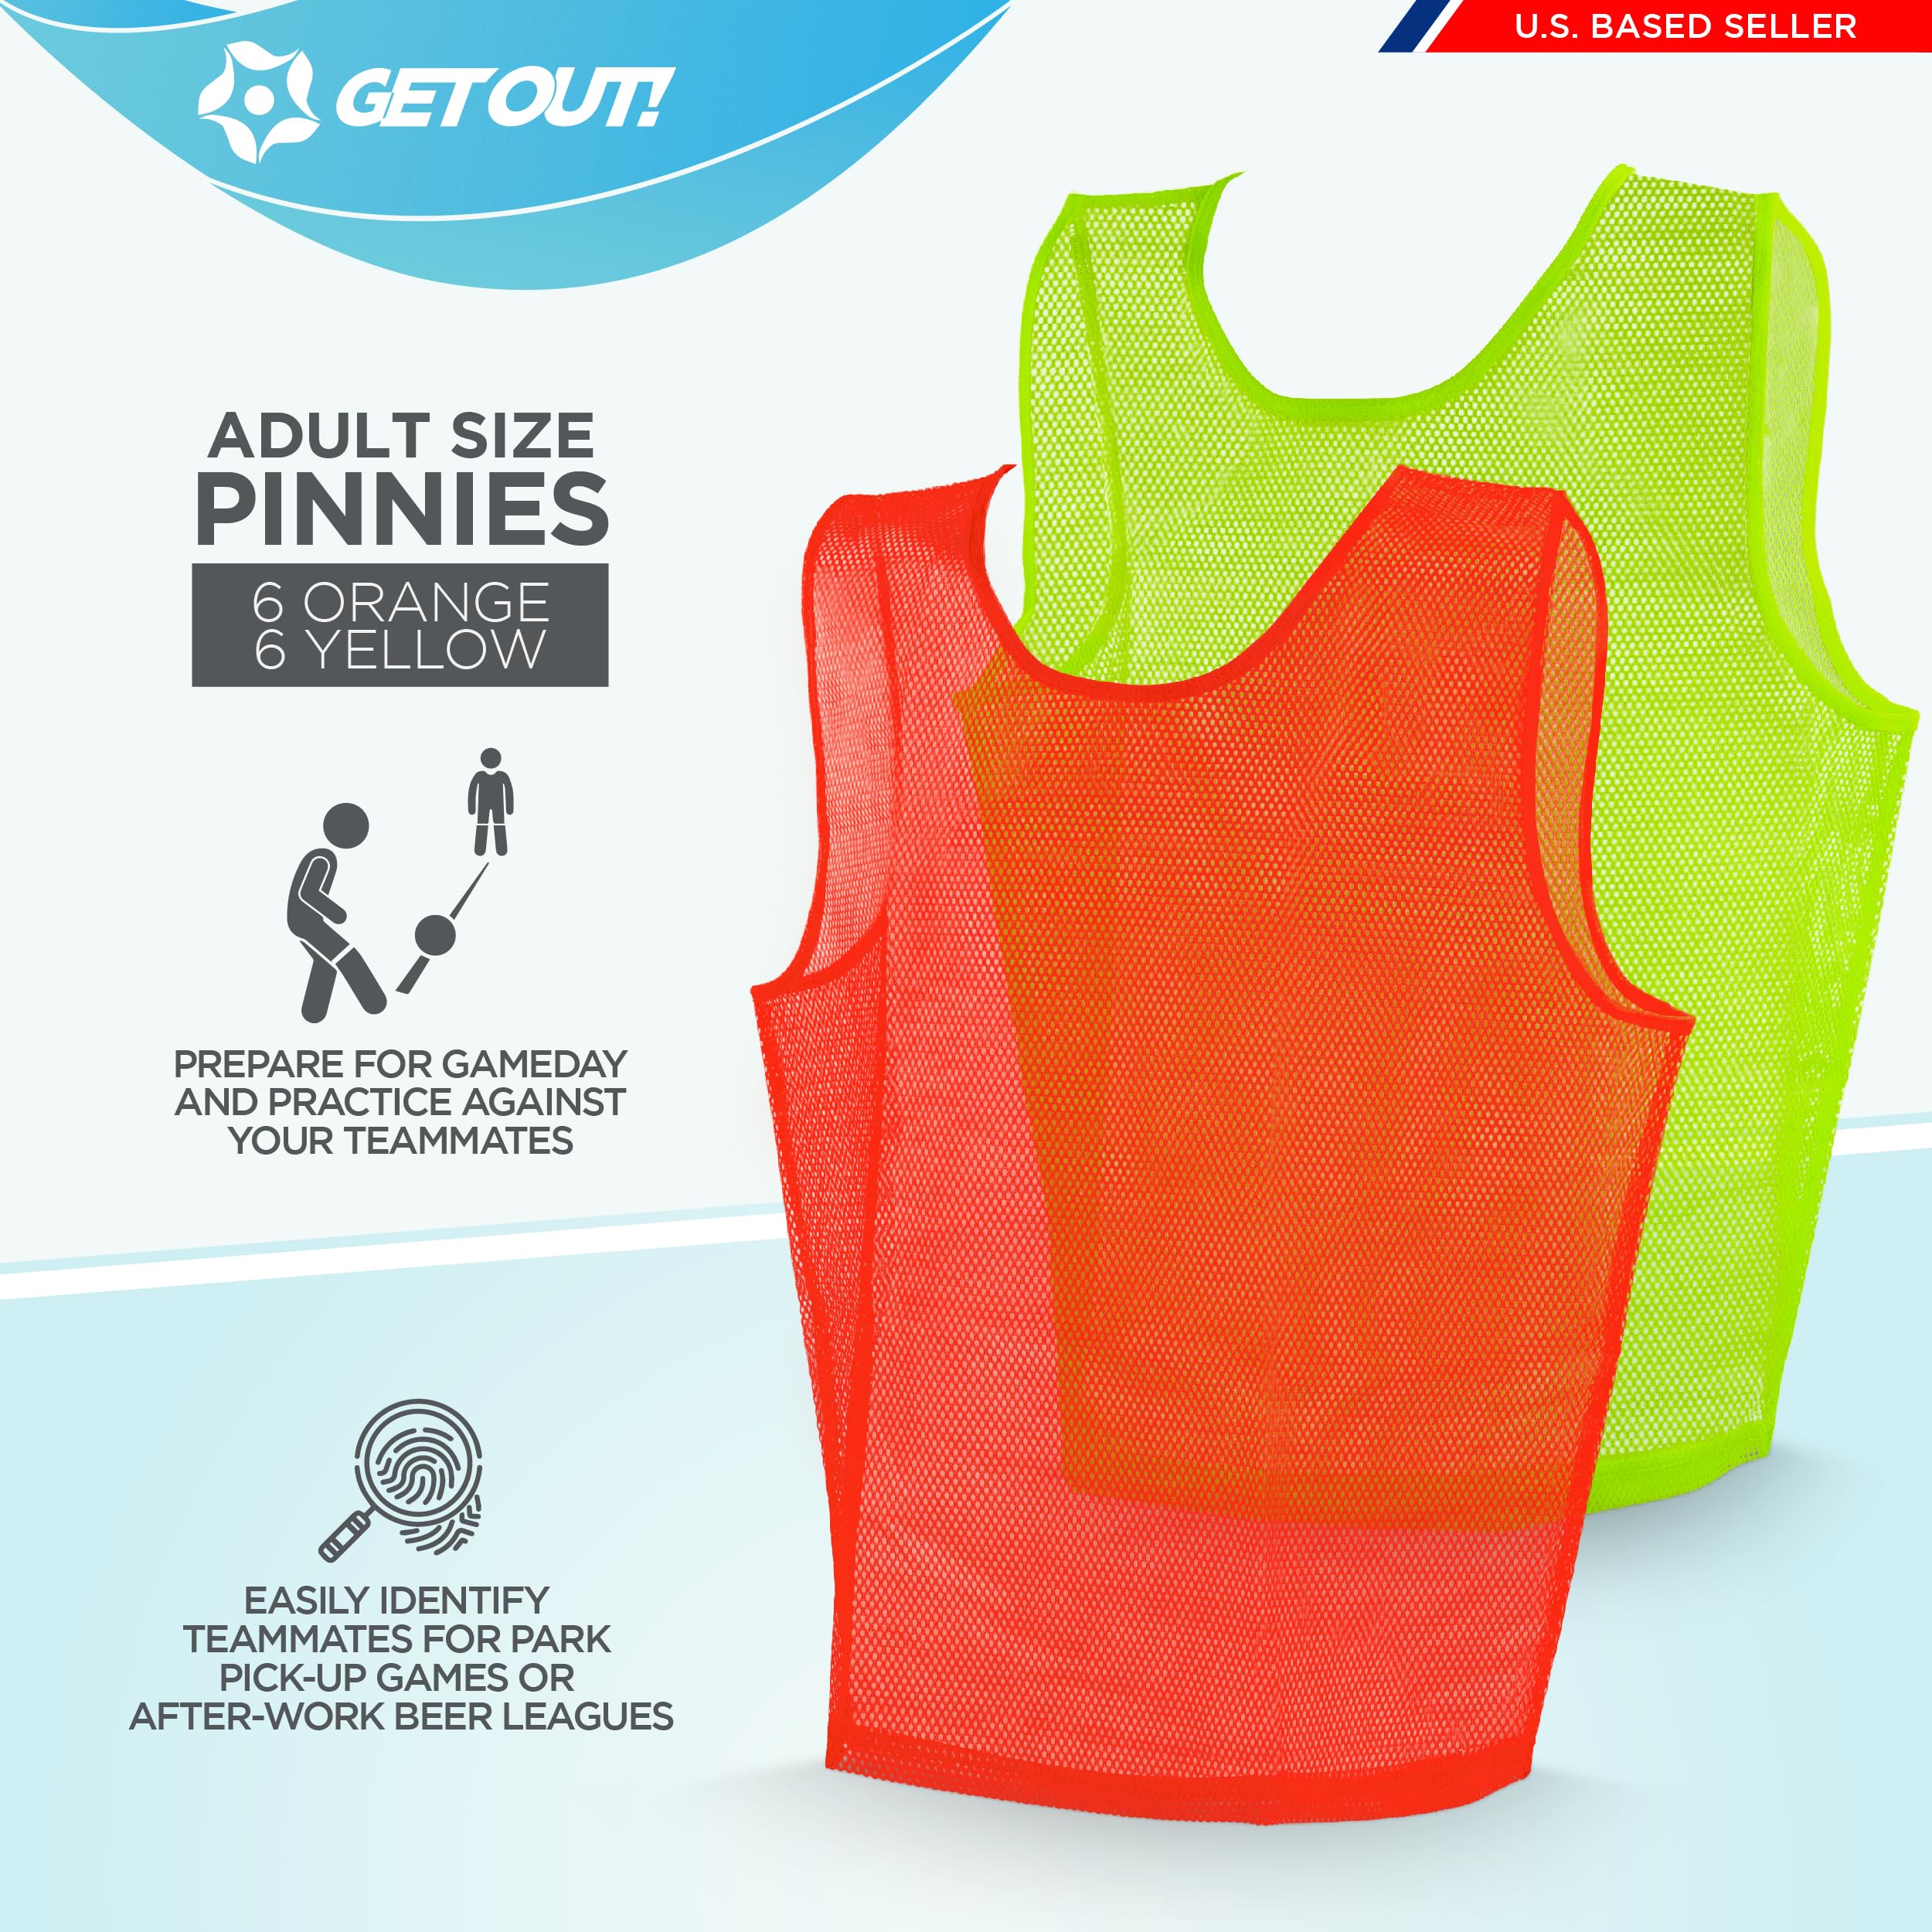 Get Out! Scrimmage Vest Pinnies 12pk in Red and Blue – Youth, Teens and Adult Sizes – Nylon Mesh Jerseys for Any Sport